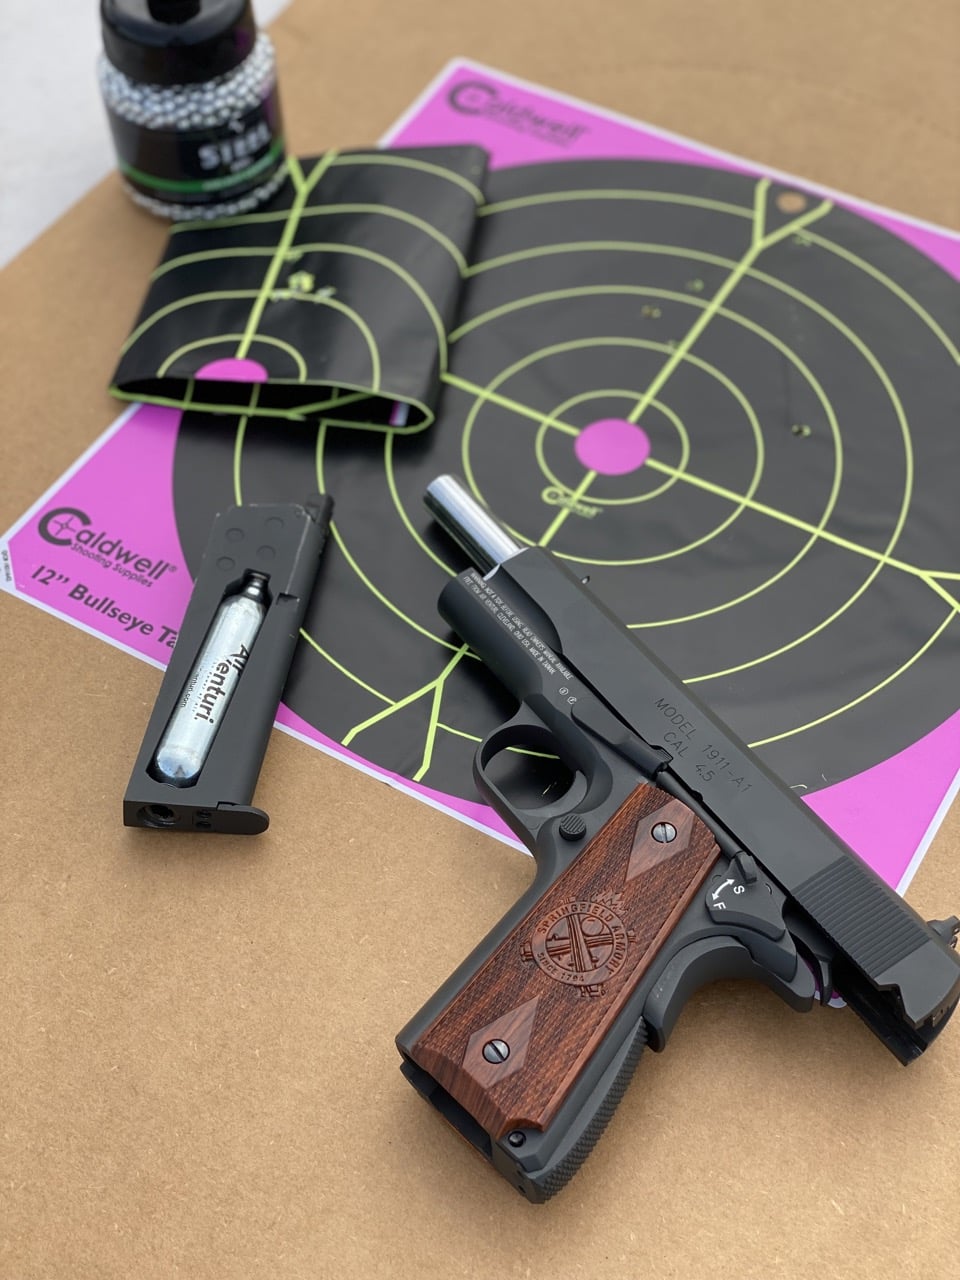 Accuracy testing at 5 and 7 yards